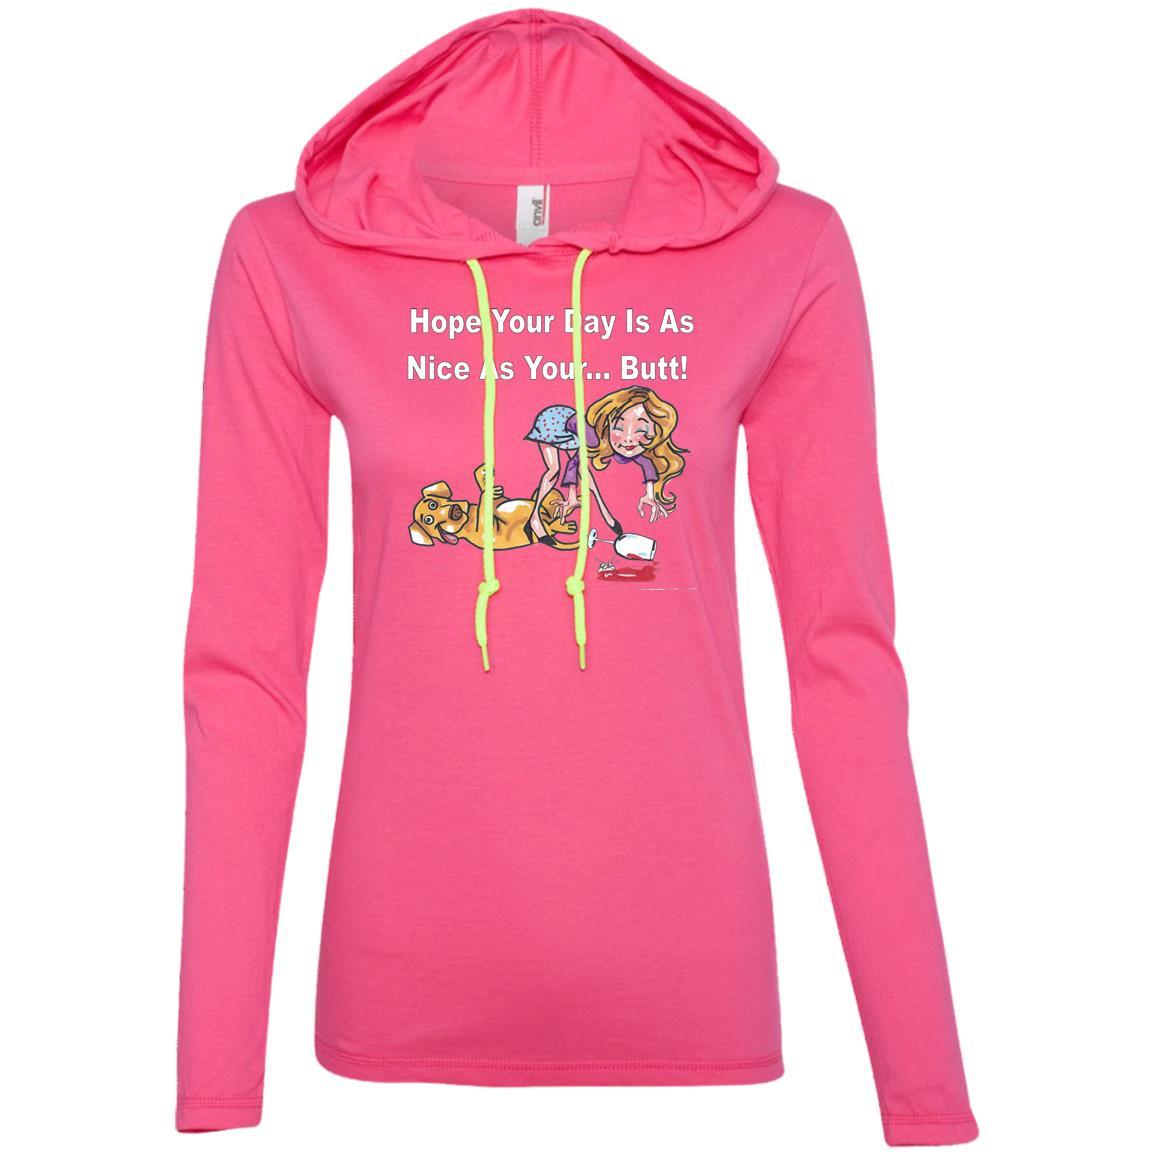 T-Shirts Hot Pink/Neon Yellow / S WineyBitches.co "Hope Your Day Is As Nice As Your...Butt" Wht Lettering Ladies' LS T-Shirt Hoodie WineyBitchesCo